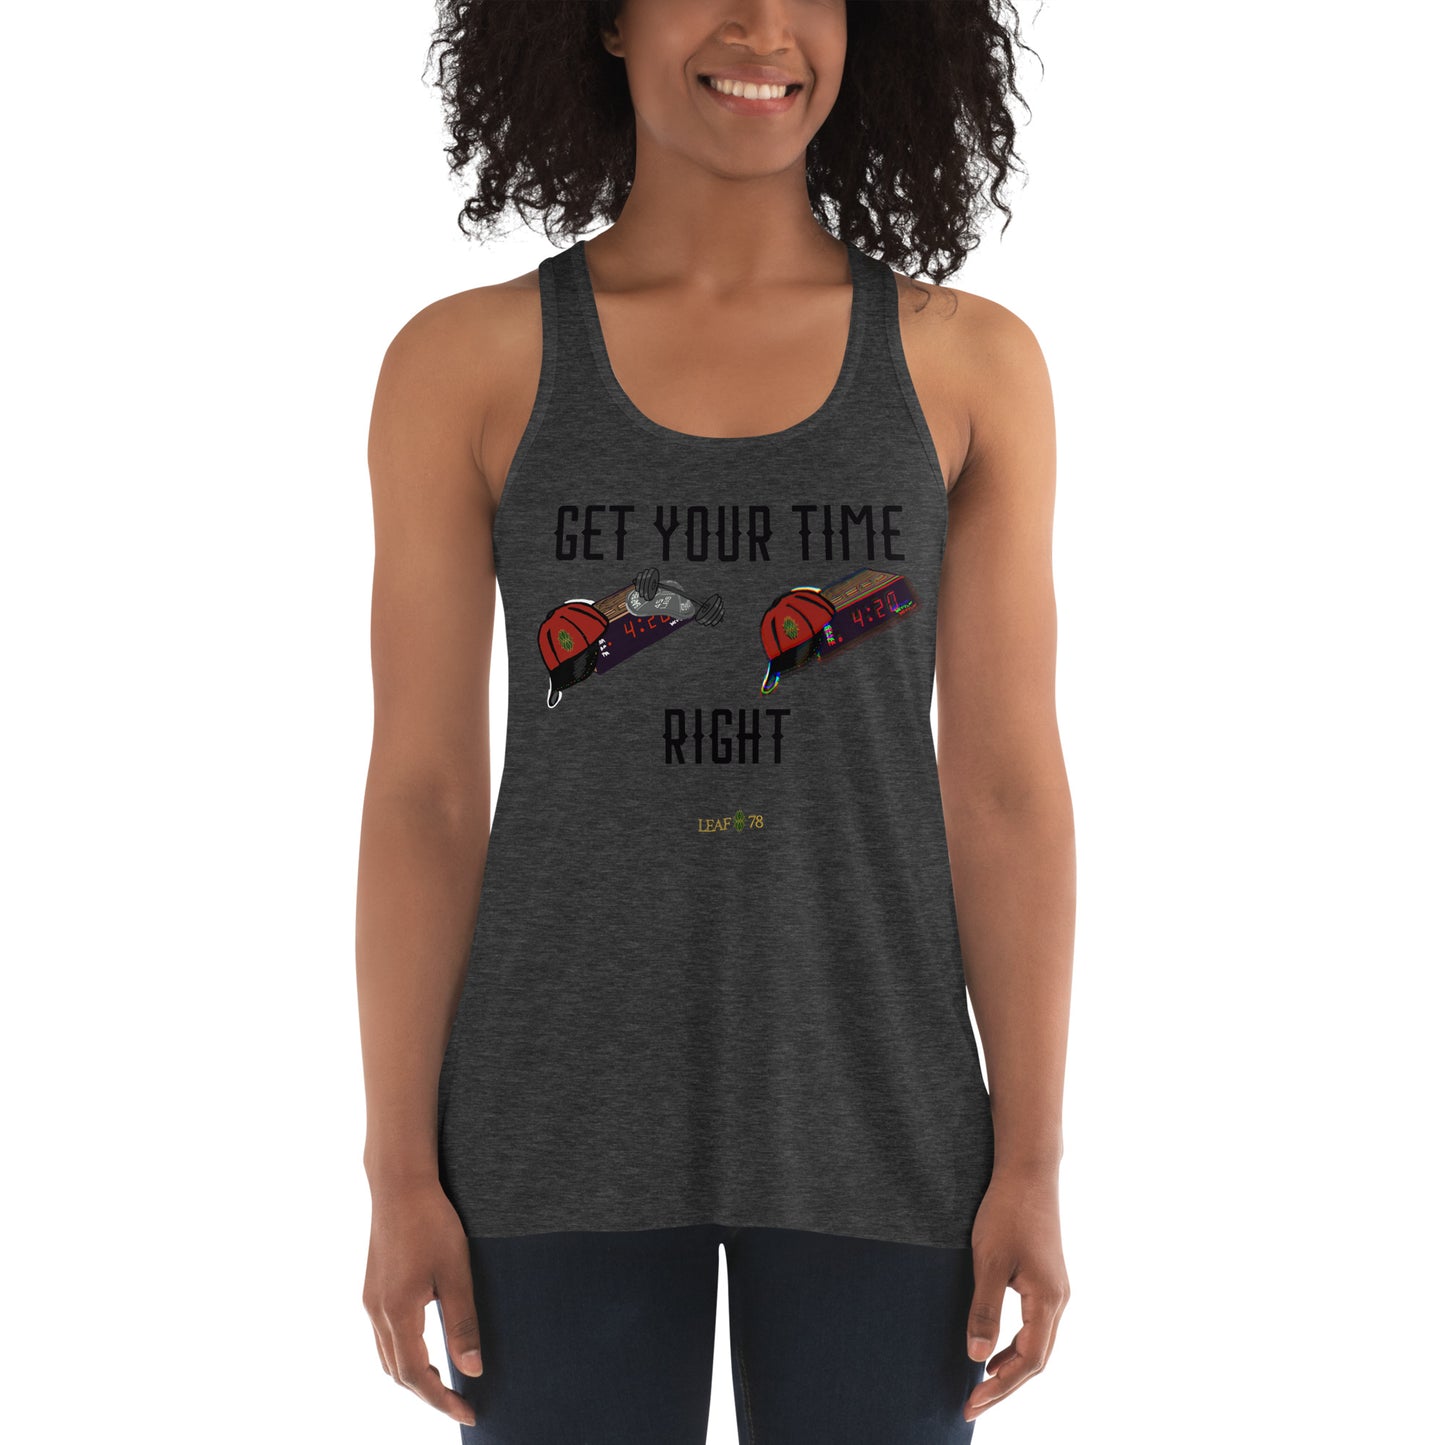 Get Your TIme Right Flowy Racerback Tank